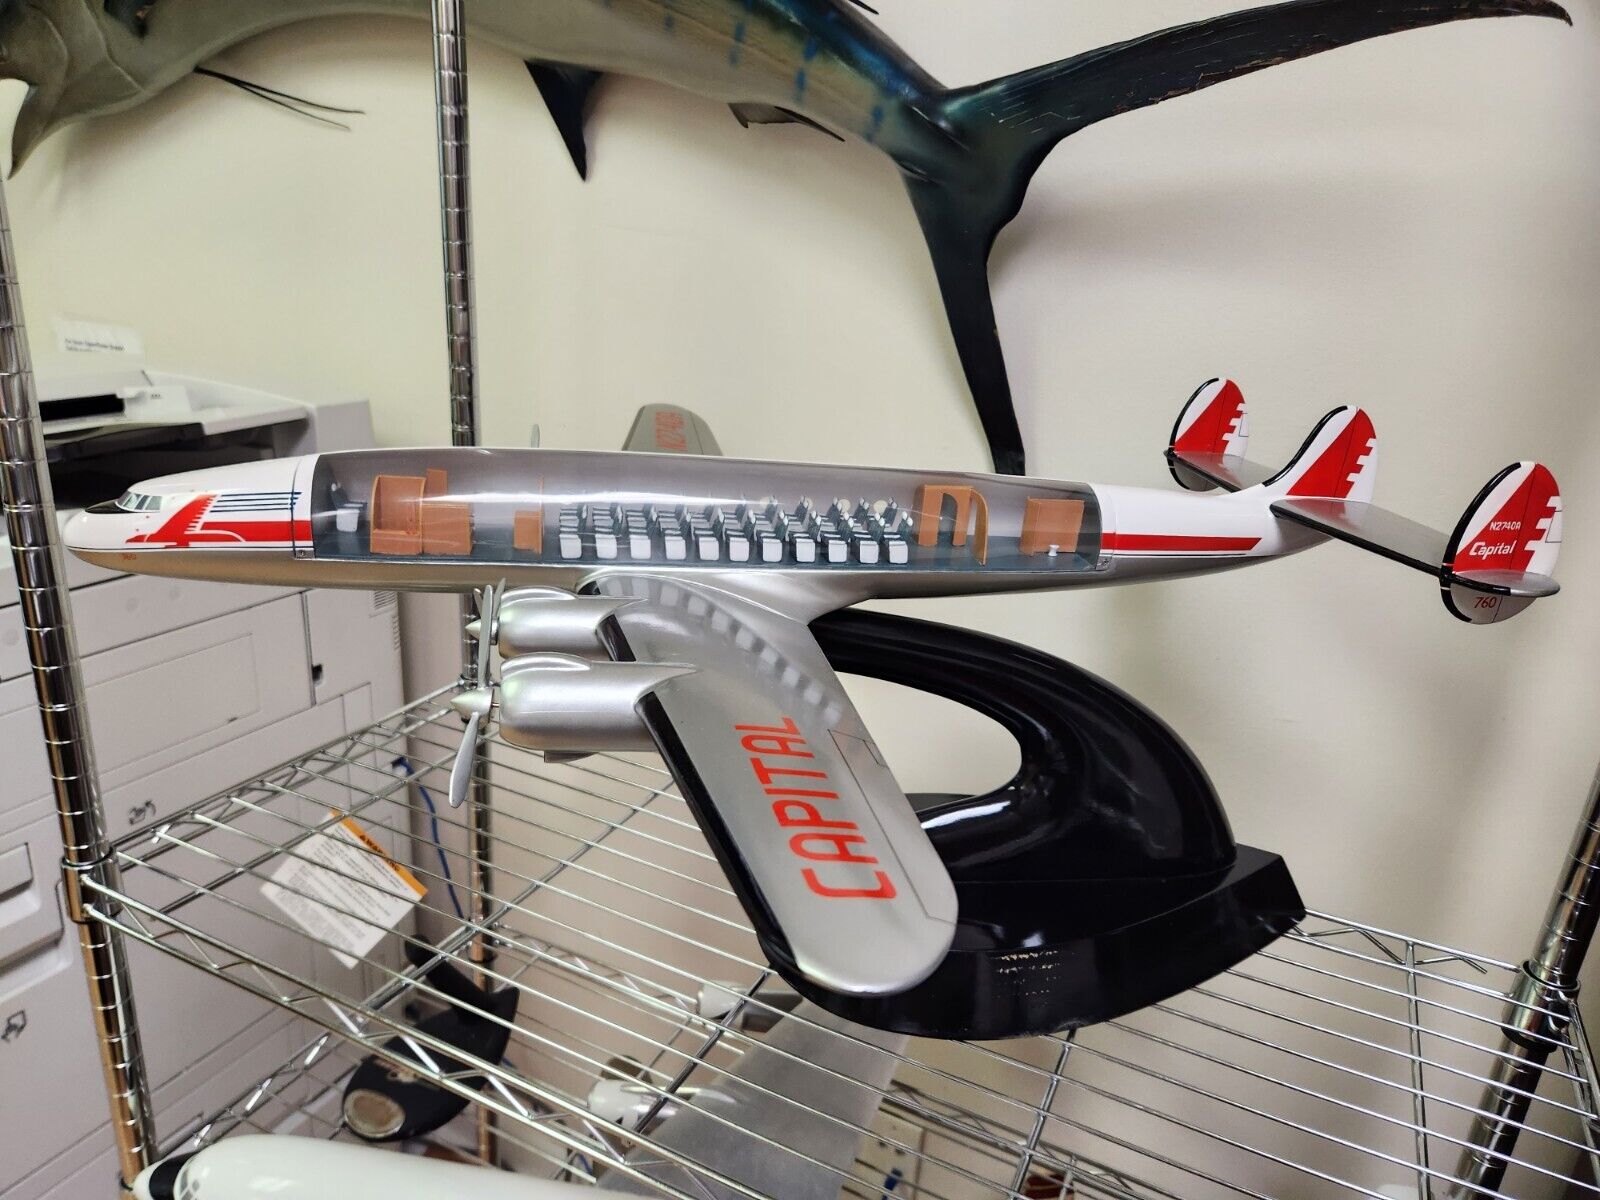 Capital Airlines Lockheed Constellation large display model. 28 inches.